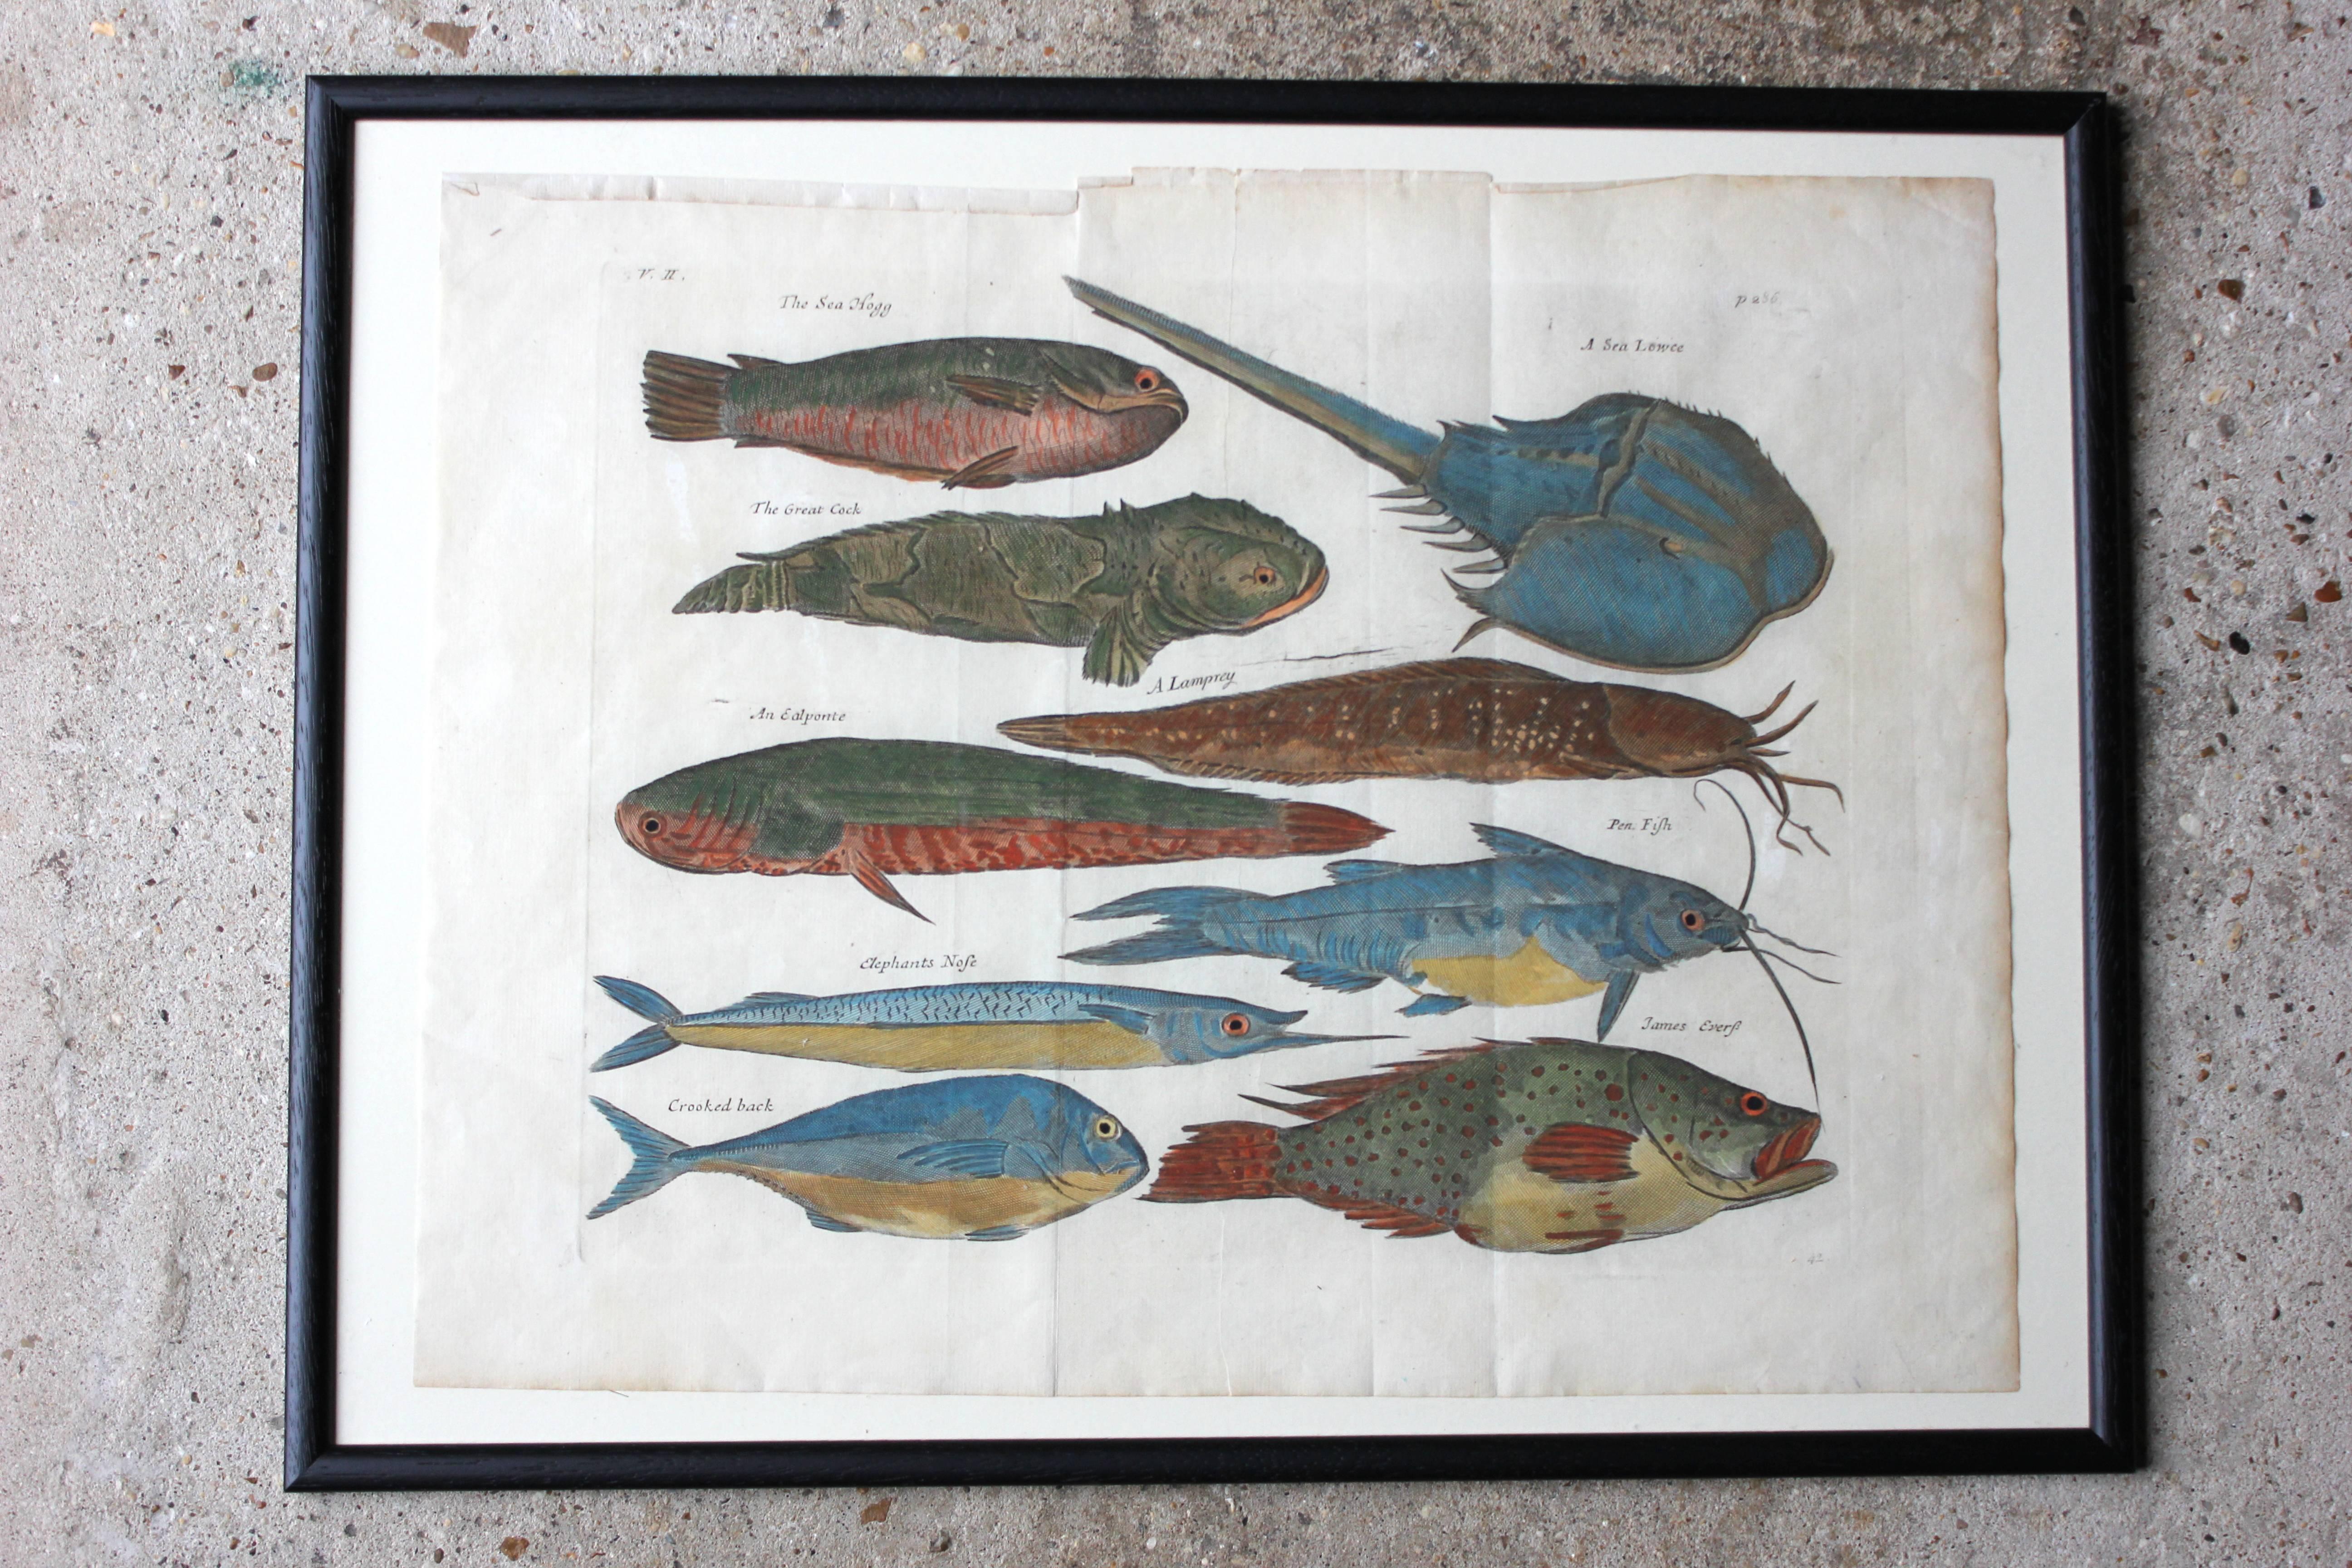 Mid-18th Century Hand-Colored Copper Plates of Fish from “a Collection of Voyages and Travels